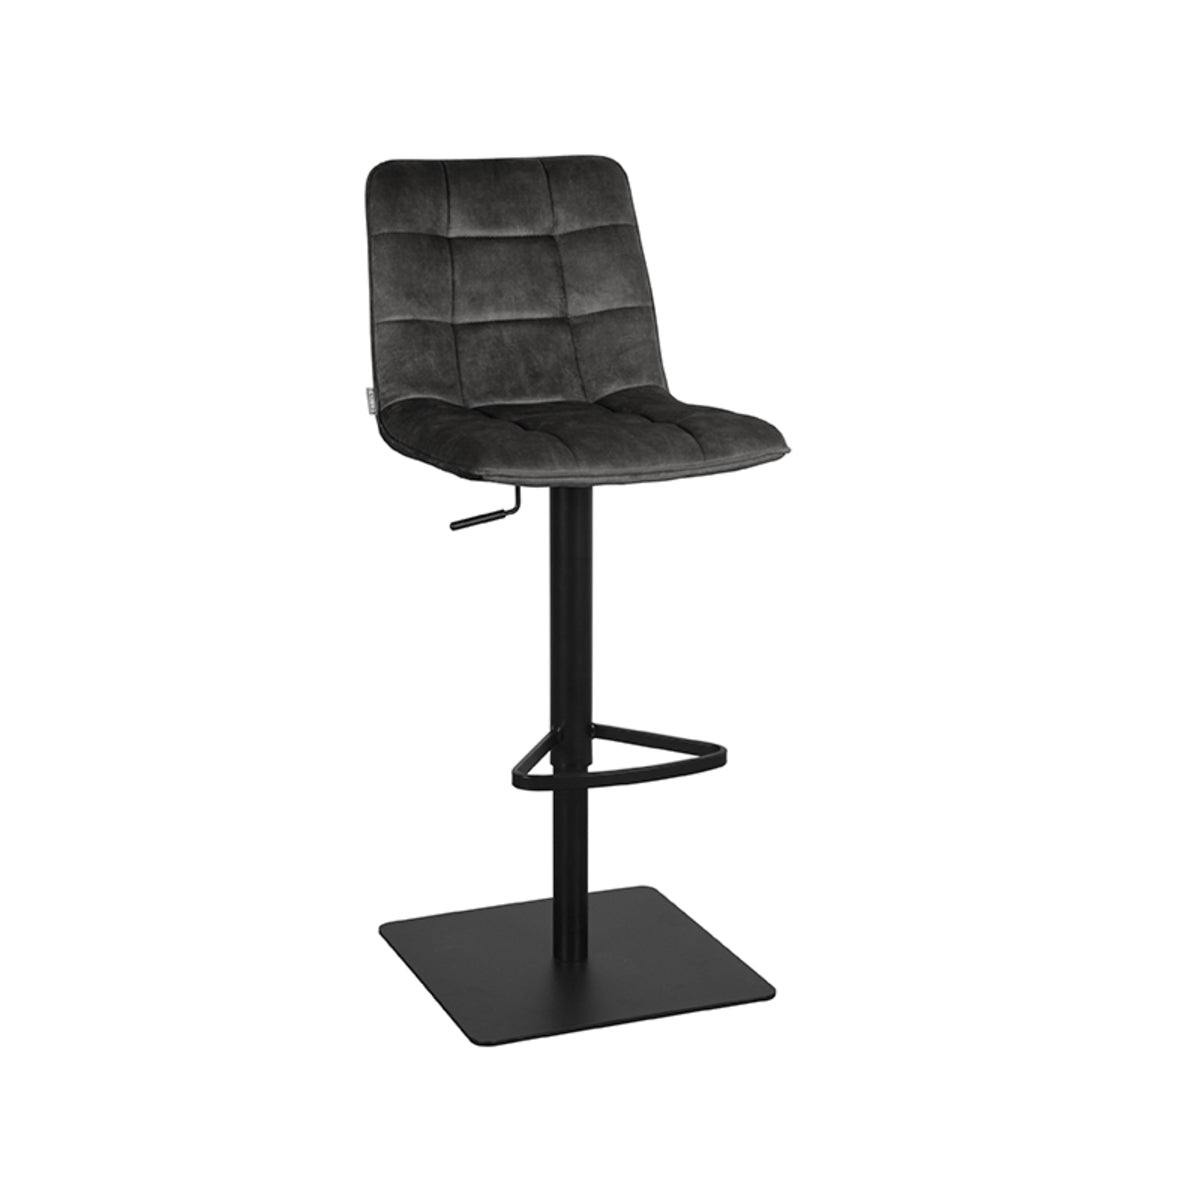 LABEL51 Bar stool Juul - Anthracite - Velours